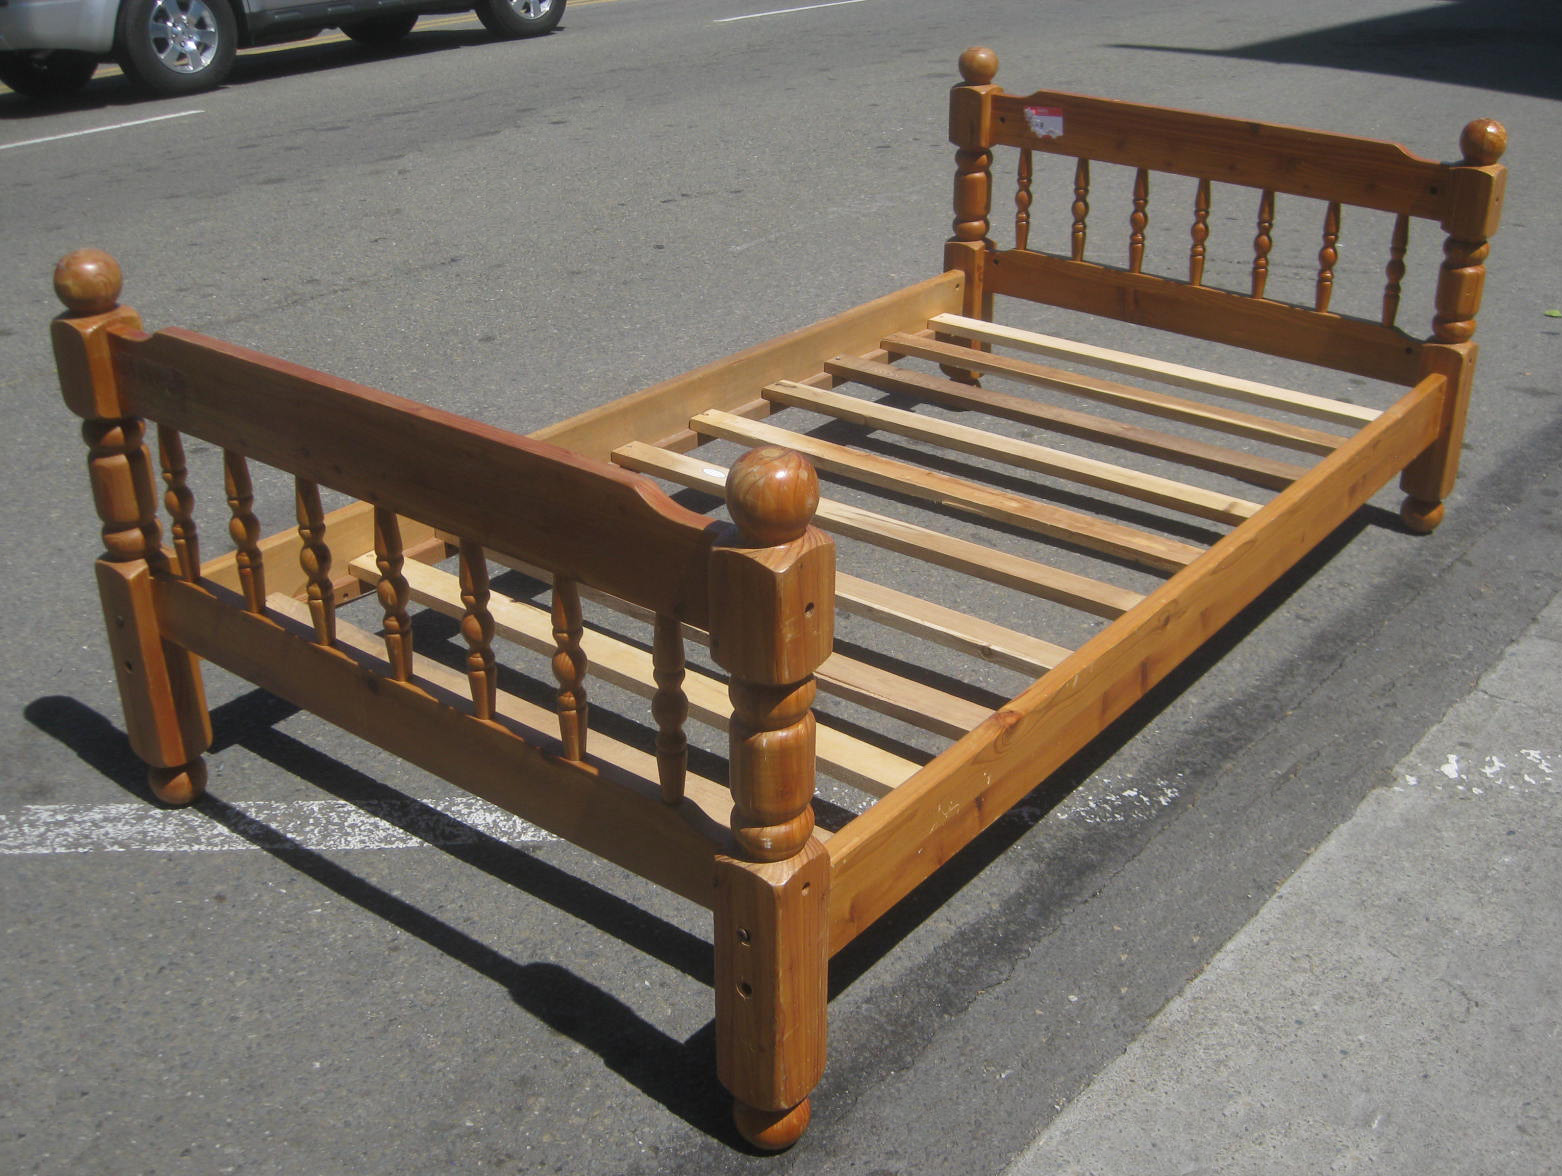 UHURU FURNITURE & COLLECTIBLES: SOLD - Twin Bed Frame - $35